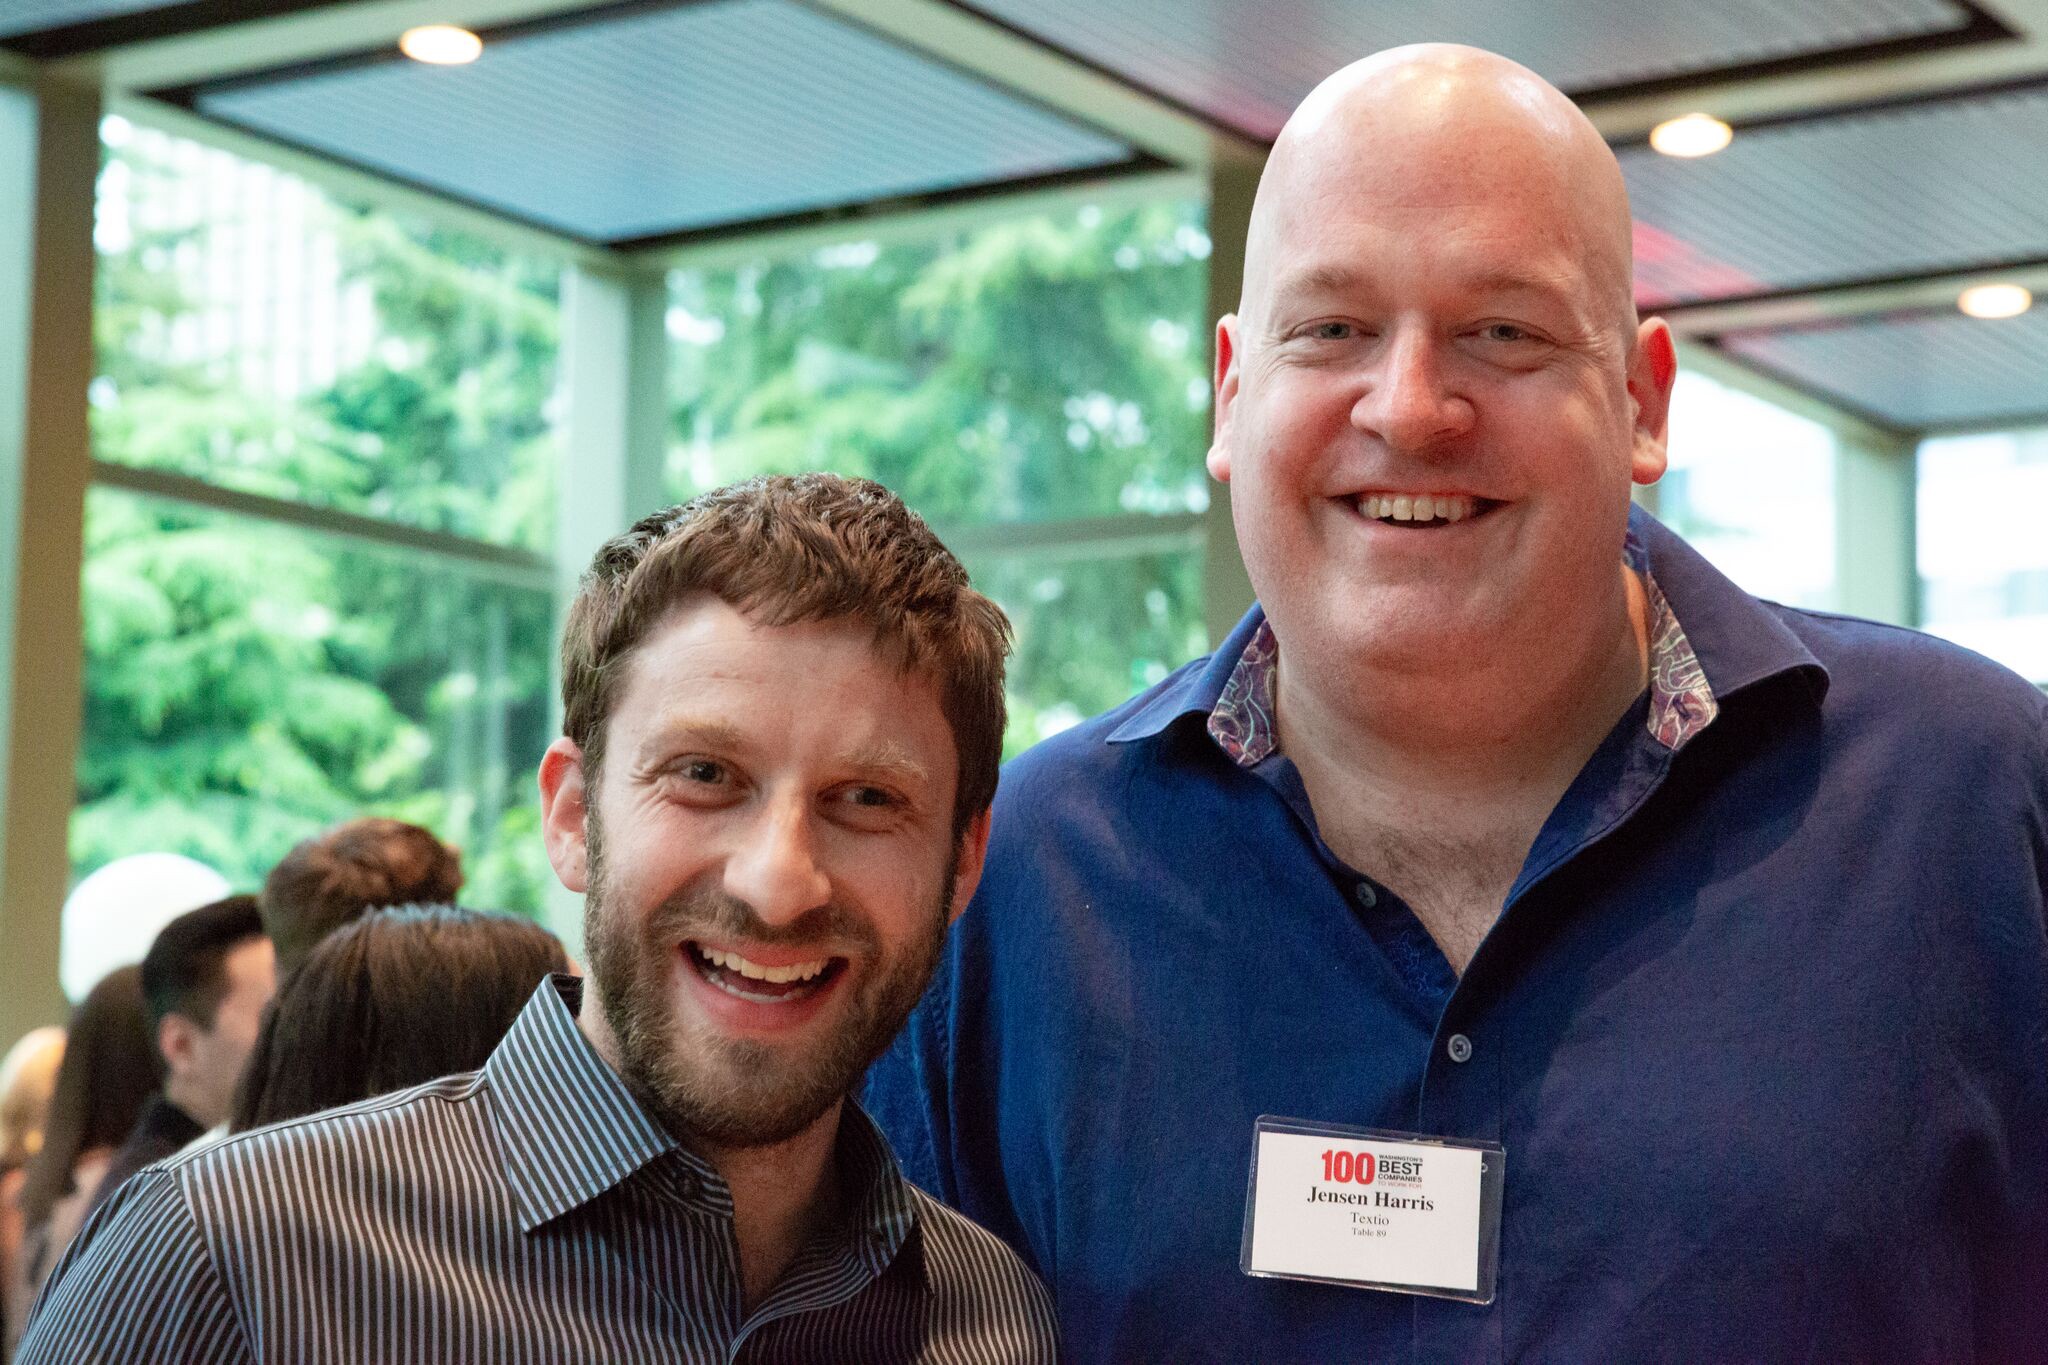 Textio's Co-Founder alongside the Director of Product at the Best Places to Work ceremony